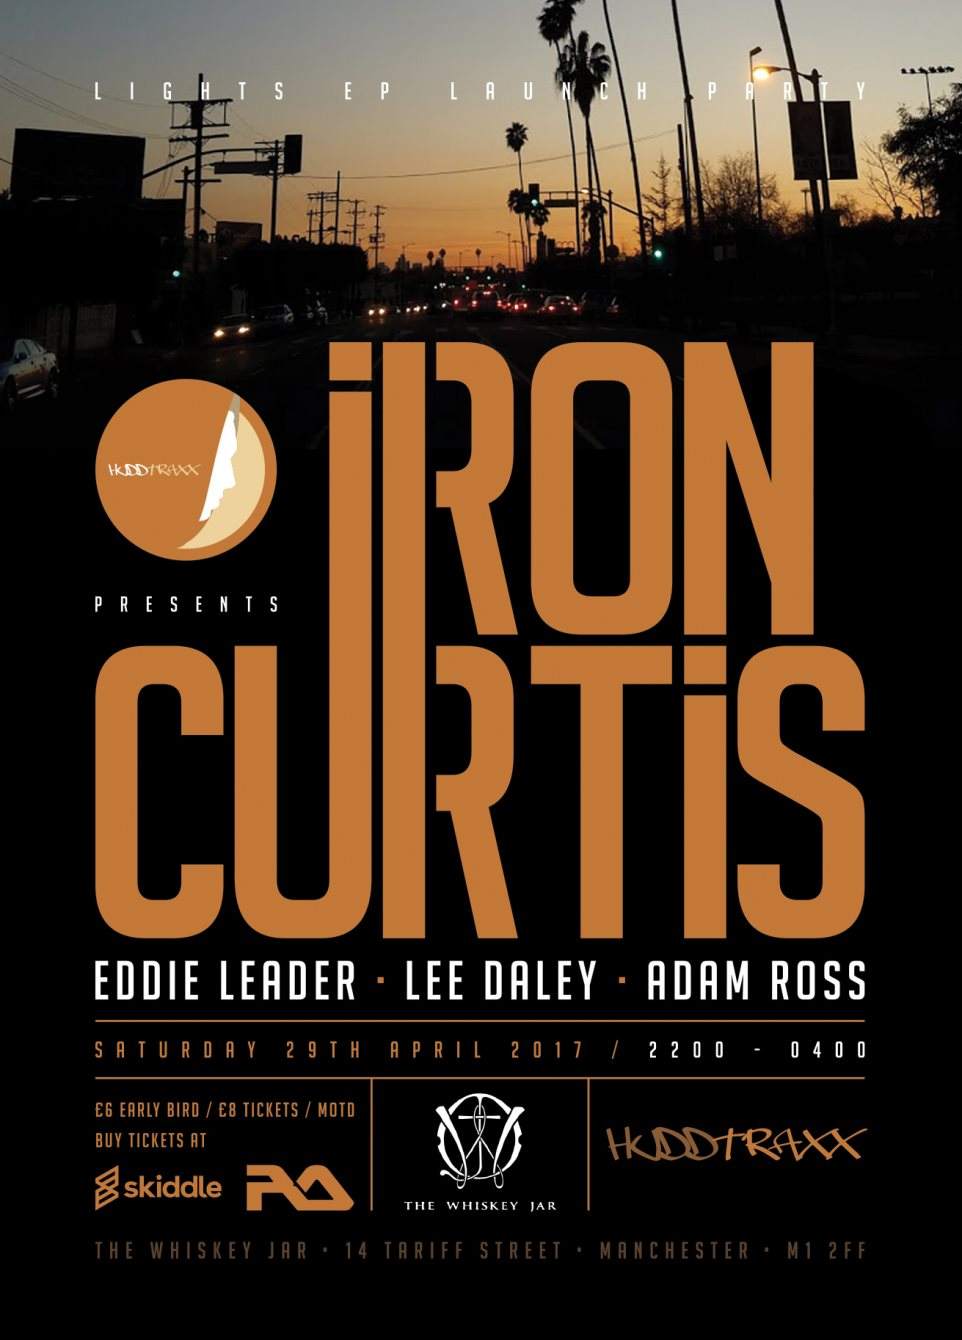 Hudd Traxx presents Iron Curtis Lights EP Launch with Eddie Leader, Lee Daley & Adam Ross - フライヤー表